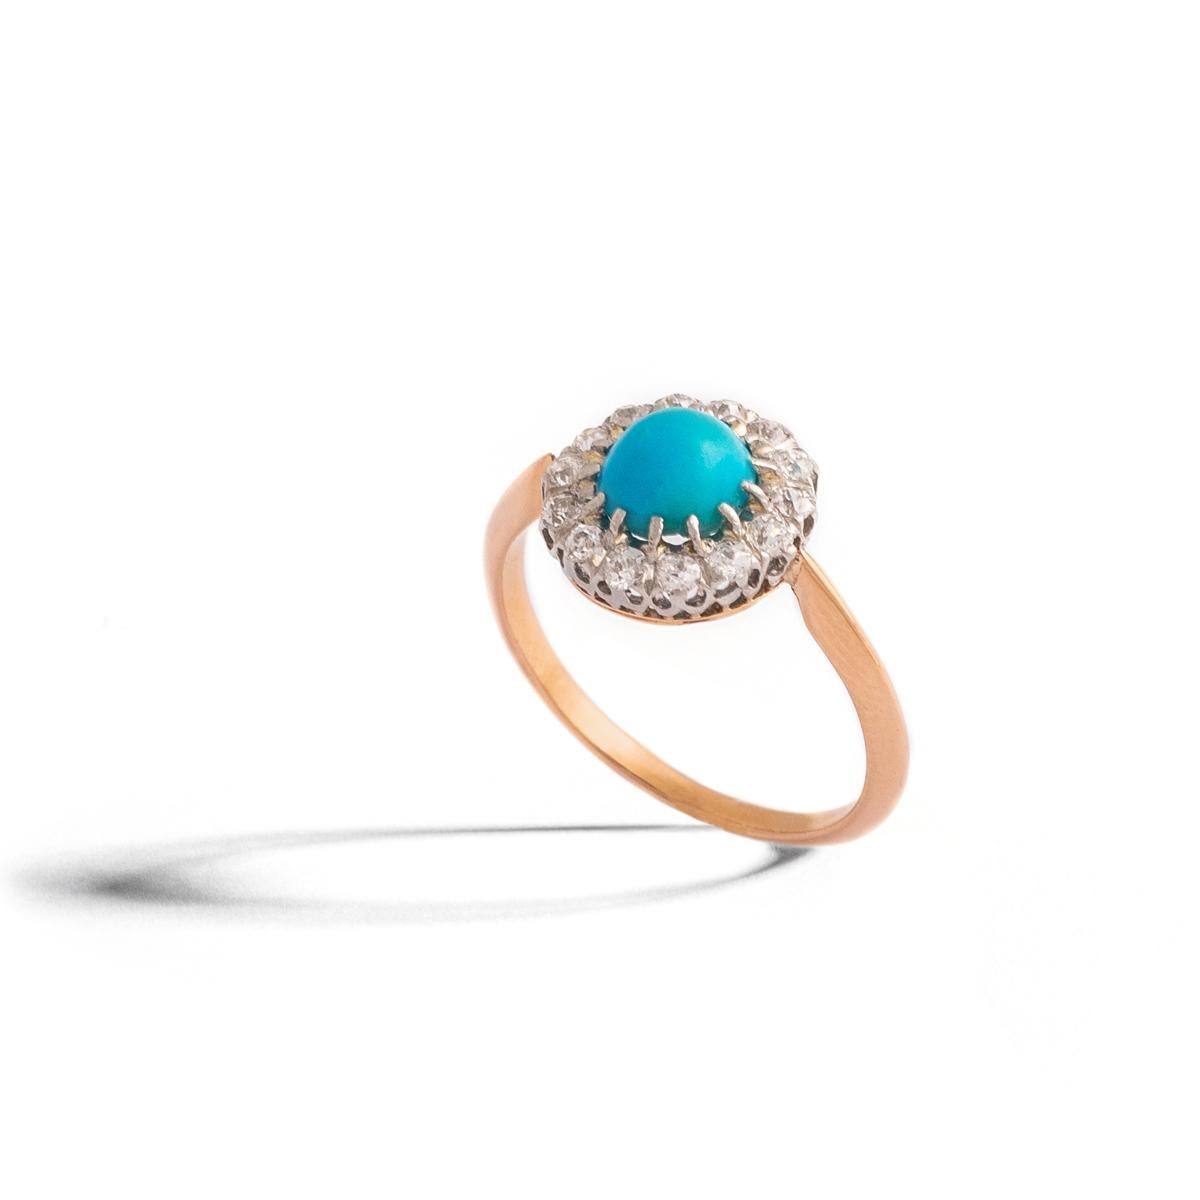 Turquoise cabochon and round cut Diamonds cluster yellow gold 18K and platinum Ring.
Turquoise diameter: 7.06 millimeters.
Diamond estimated weight: 0.25 carat.
Ring Size: 6 1/2.
Gross weight: 3.42 grams
